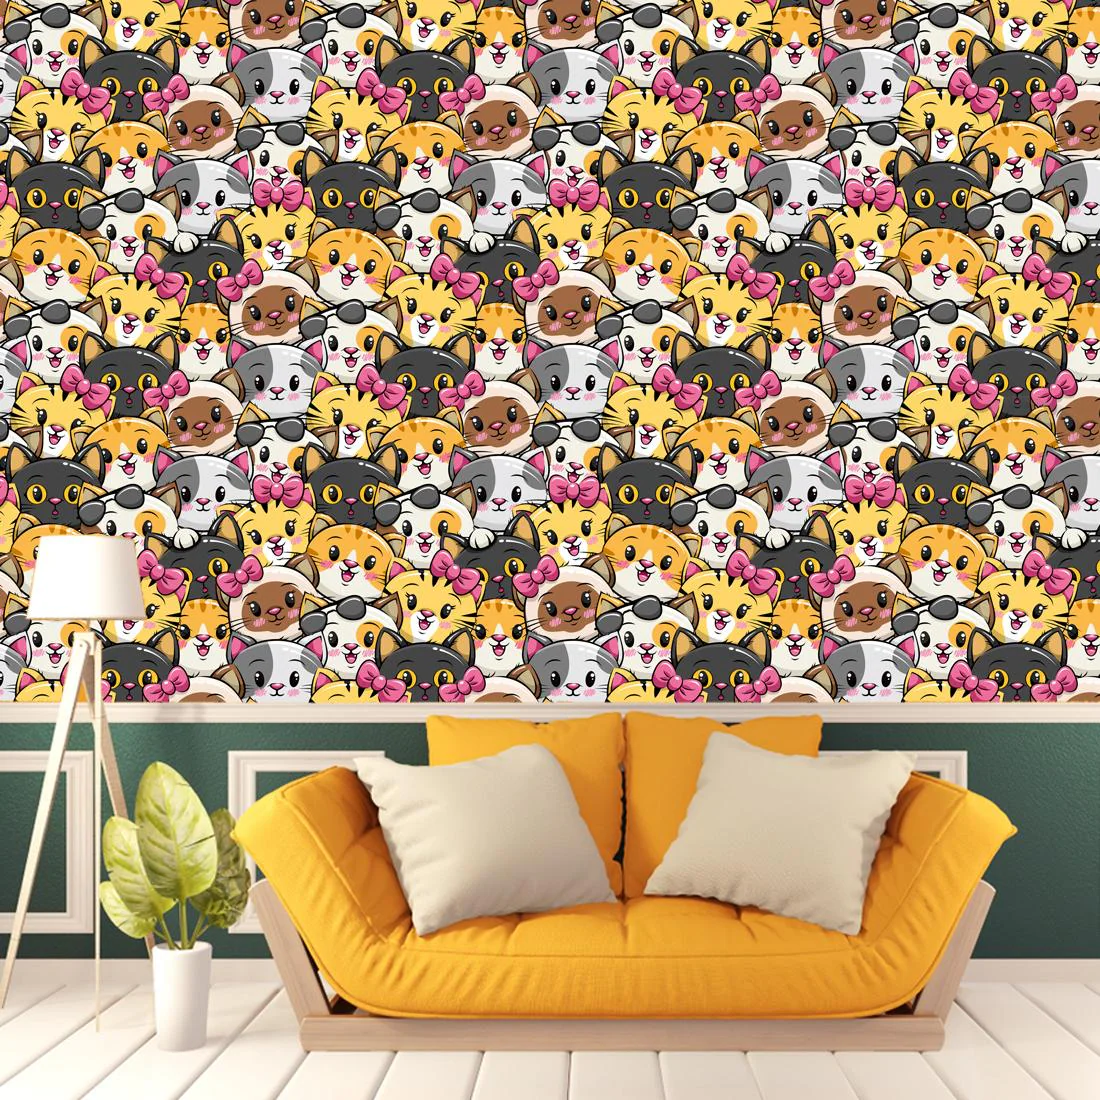 WallWear Wallpapers & Wall Stickers Model (CatFaces) Pack Of 1 Roll  (40x300) cm Wallpaper For Walls Self Adhesive Peel and Stick For Home|  Kitchen| Bedroom| Drawing Room Décor - JioMart